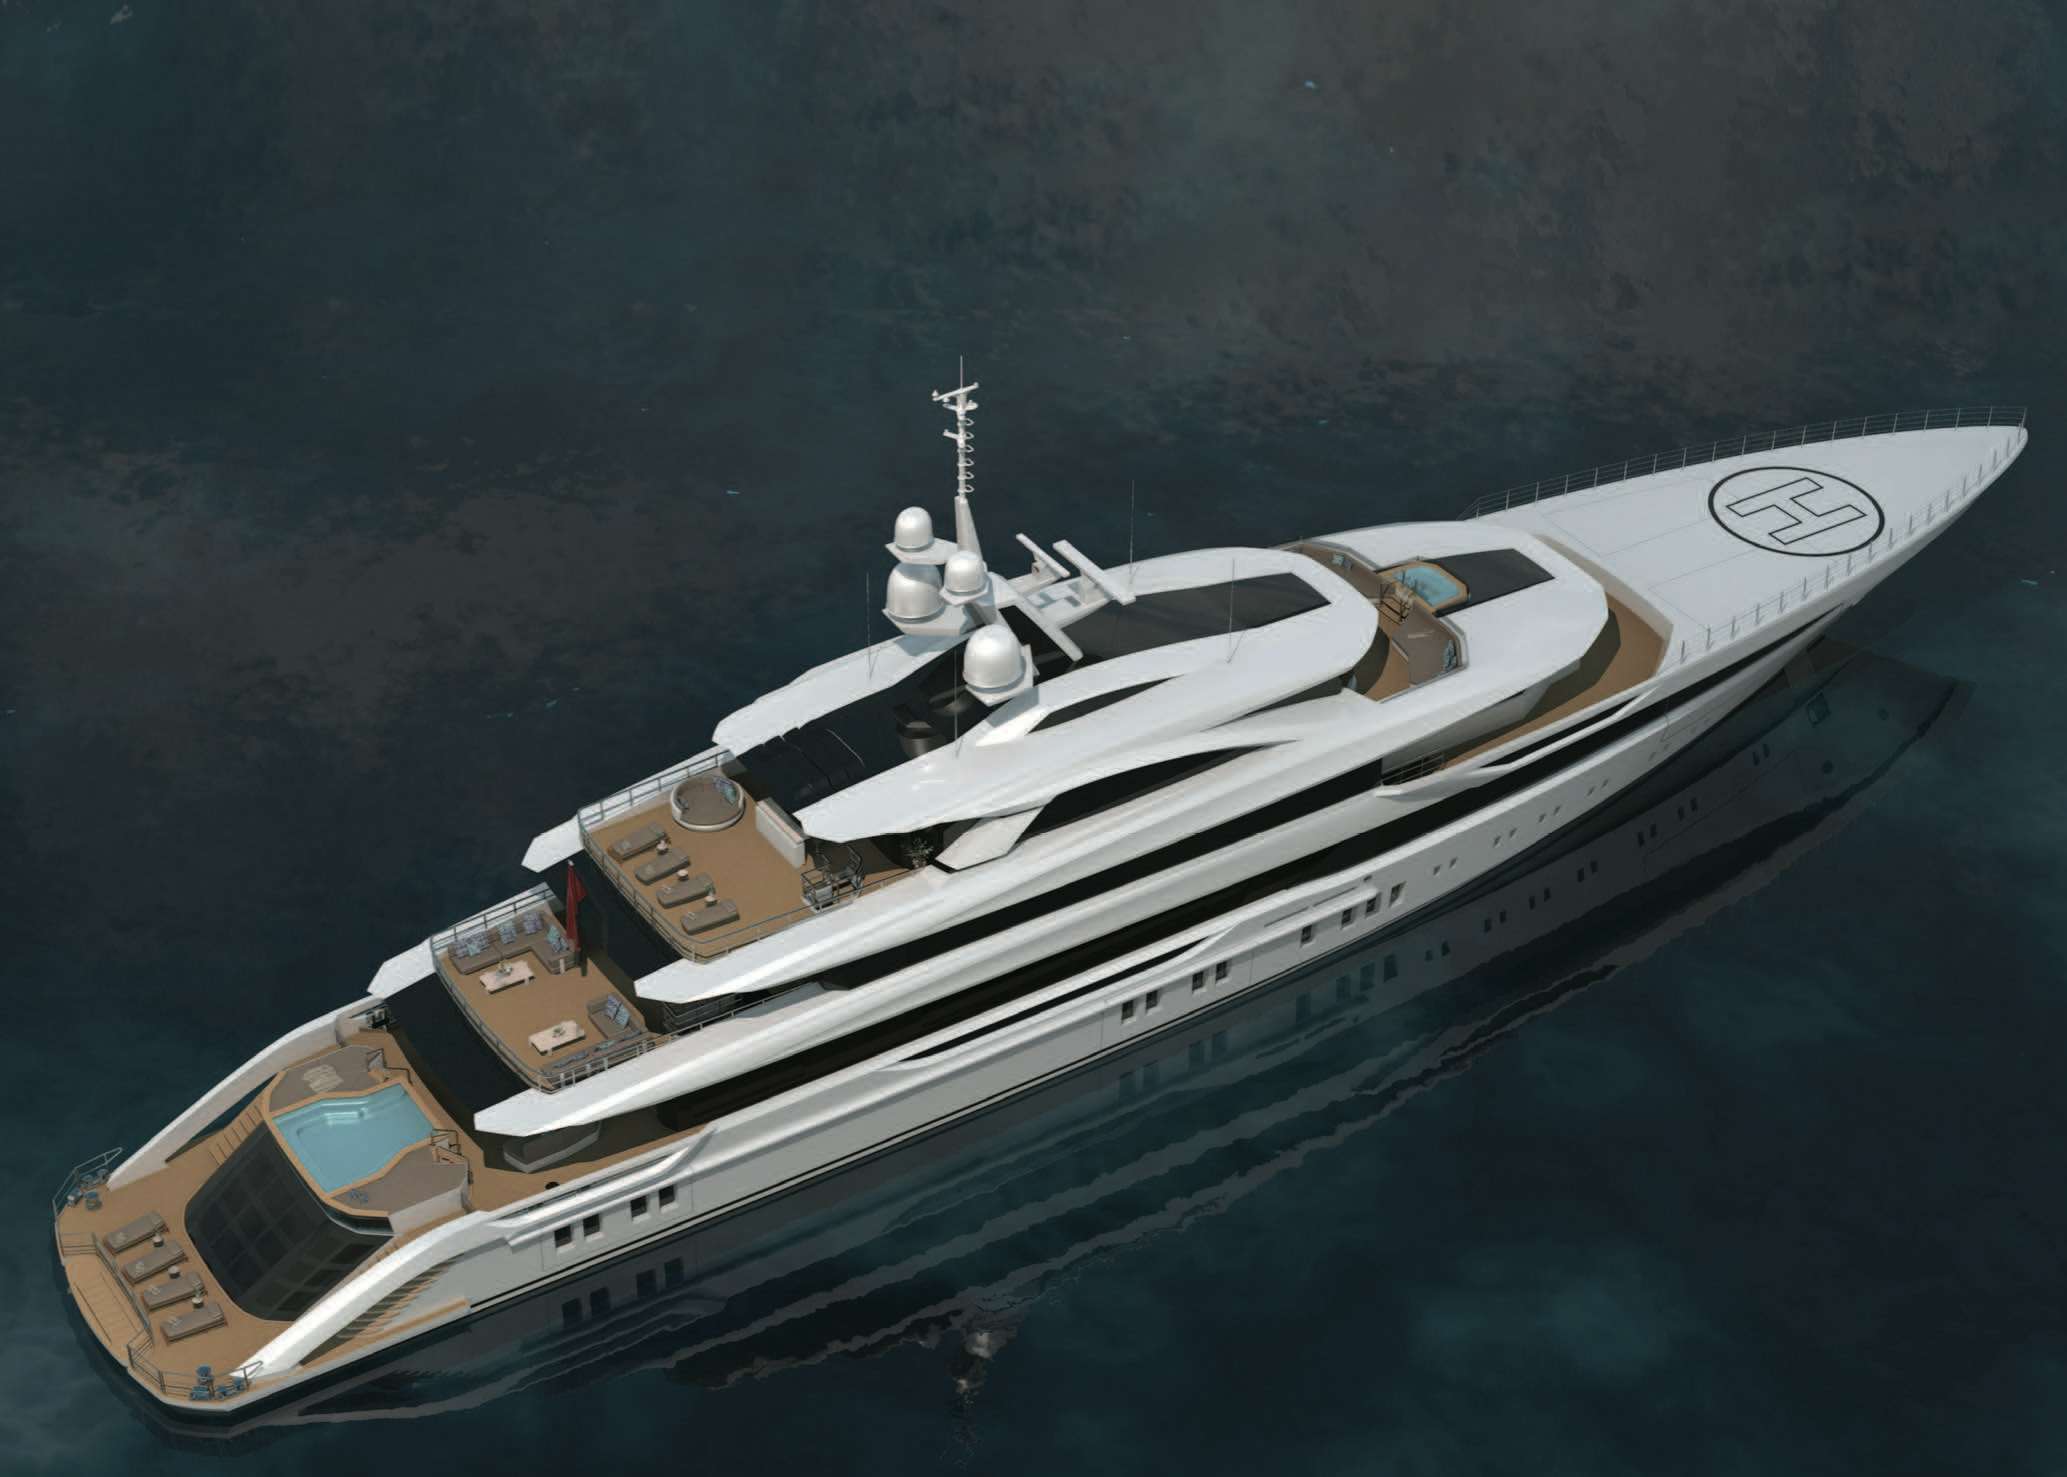 Yachts for Sale  Over 1000 New & Used Superyachts for Sale Worldwide